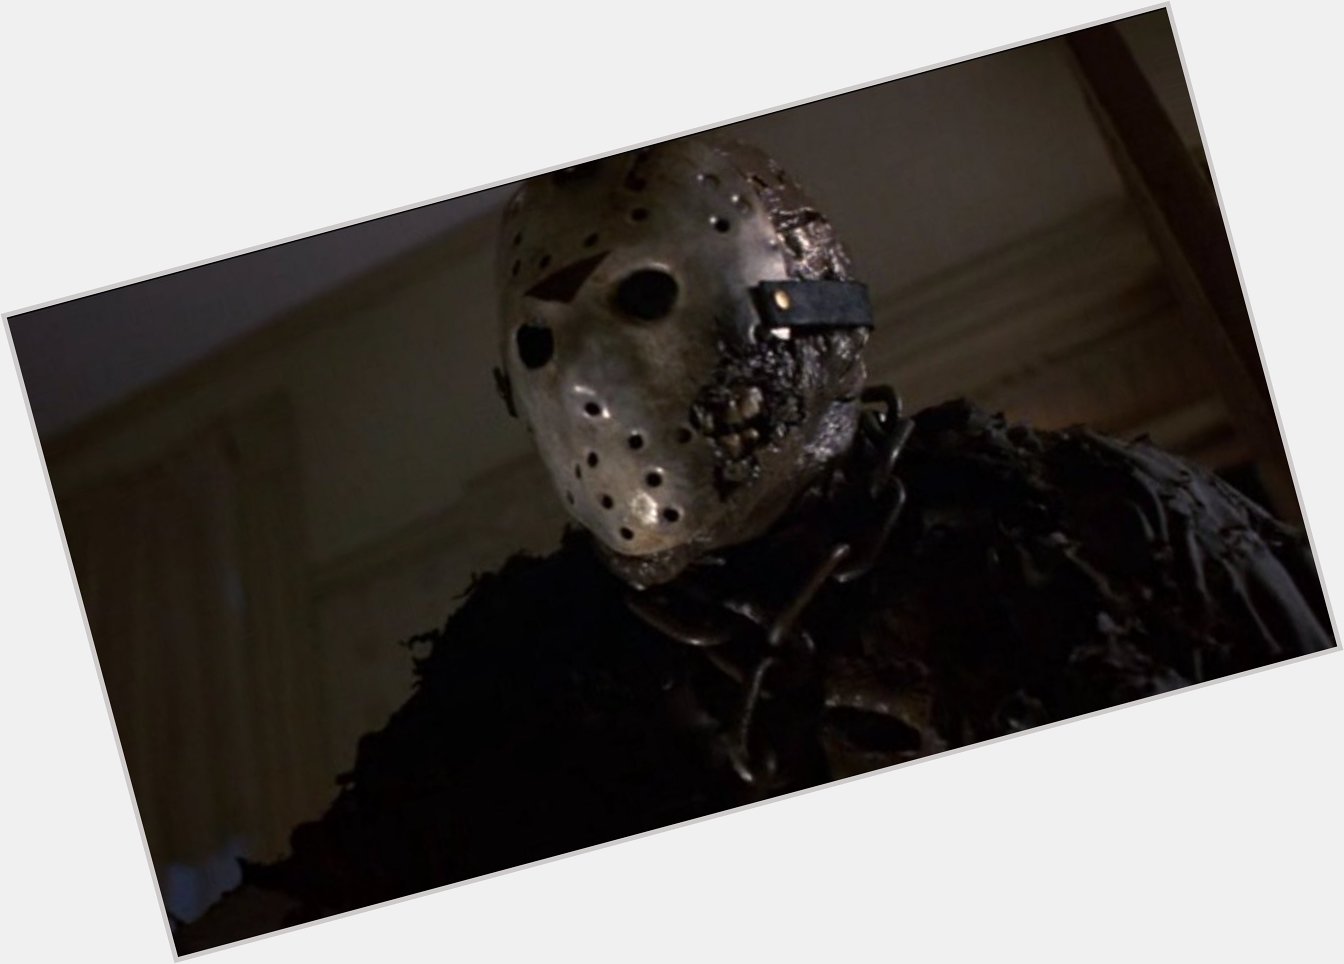 Happy birthday to Kane Hodder one of my favorite jason voorhees actors hope you have a great birthday 